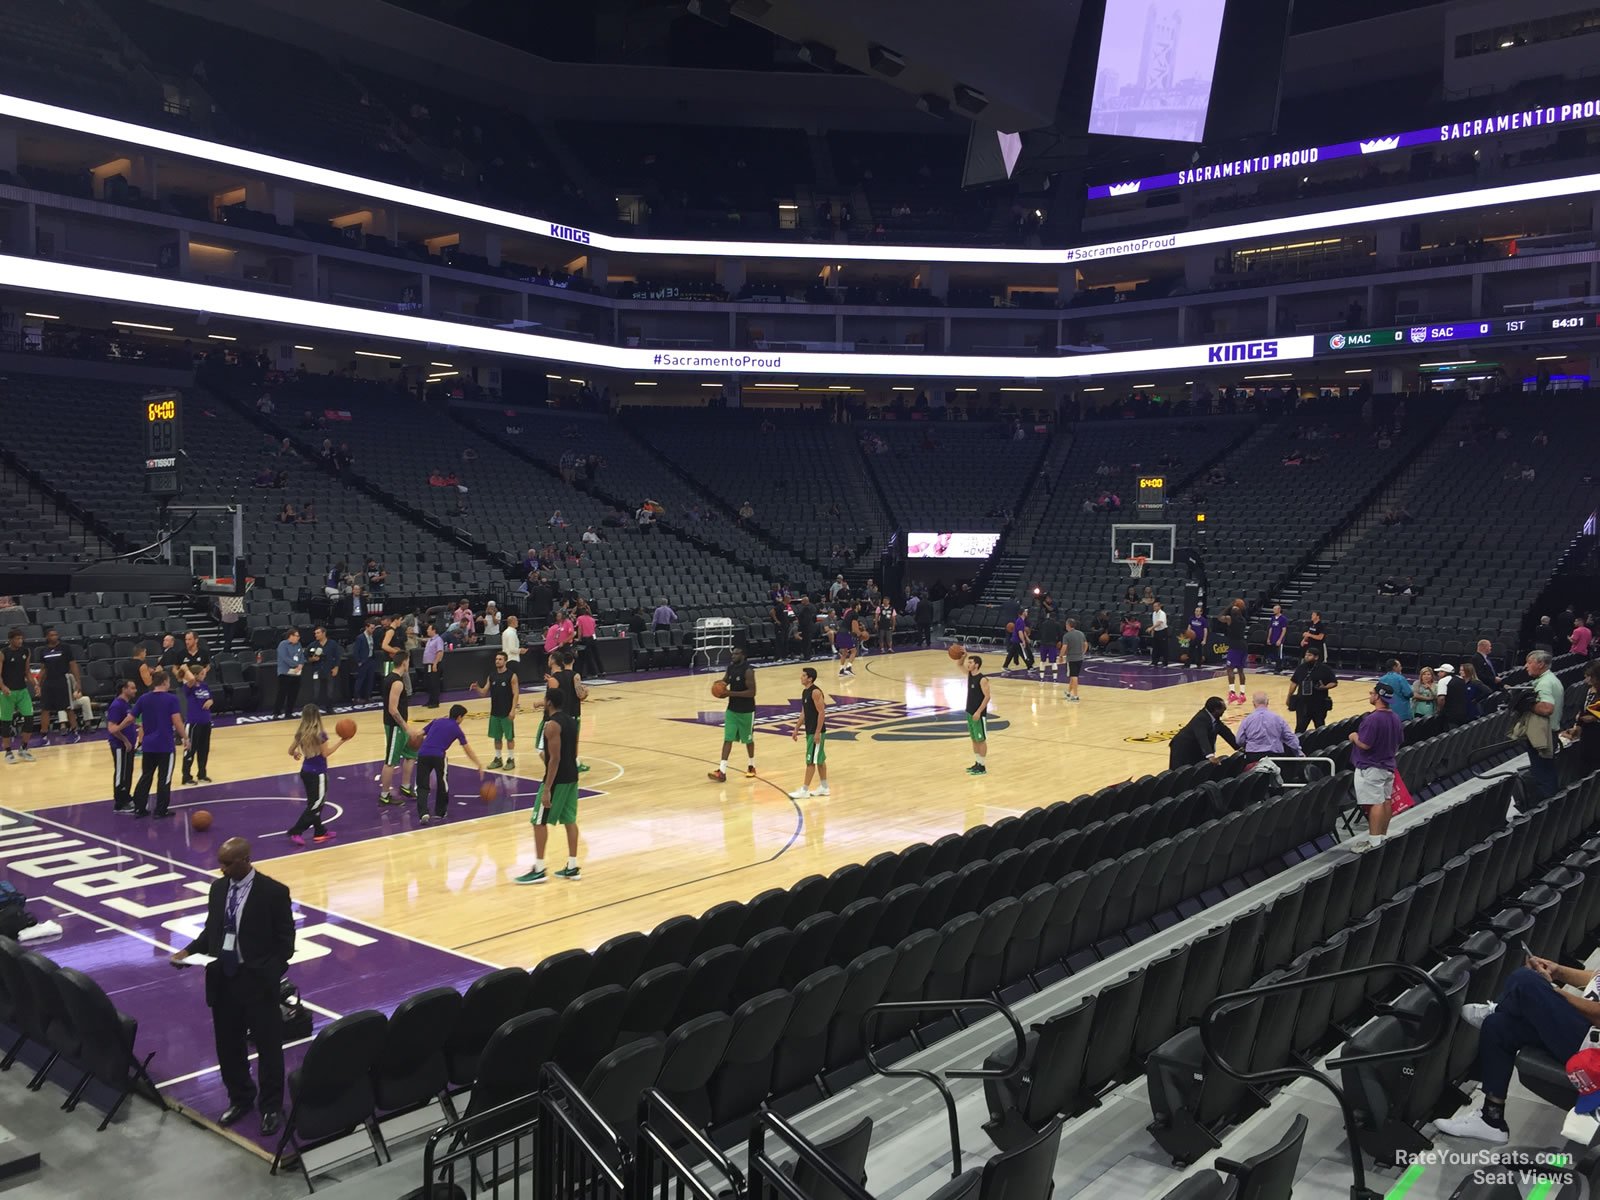 section 123, row dd seat view  for basketball - golden 1 center